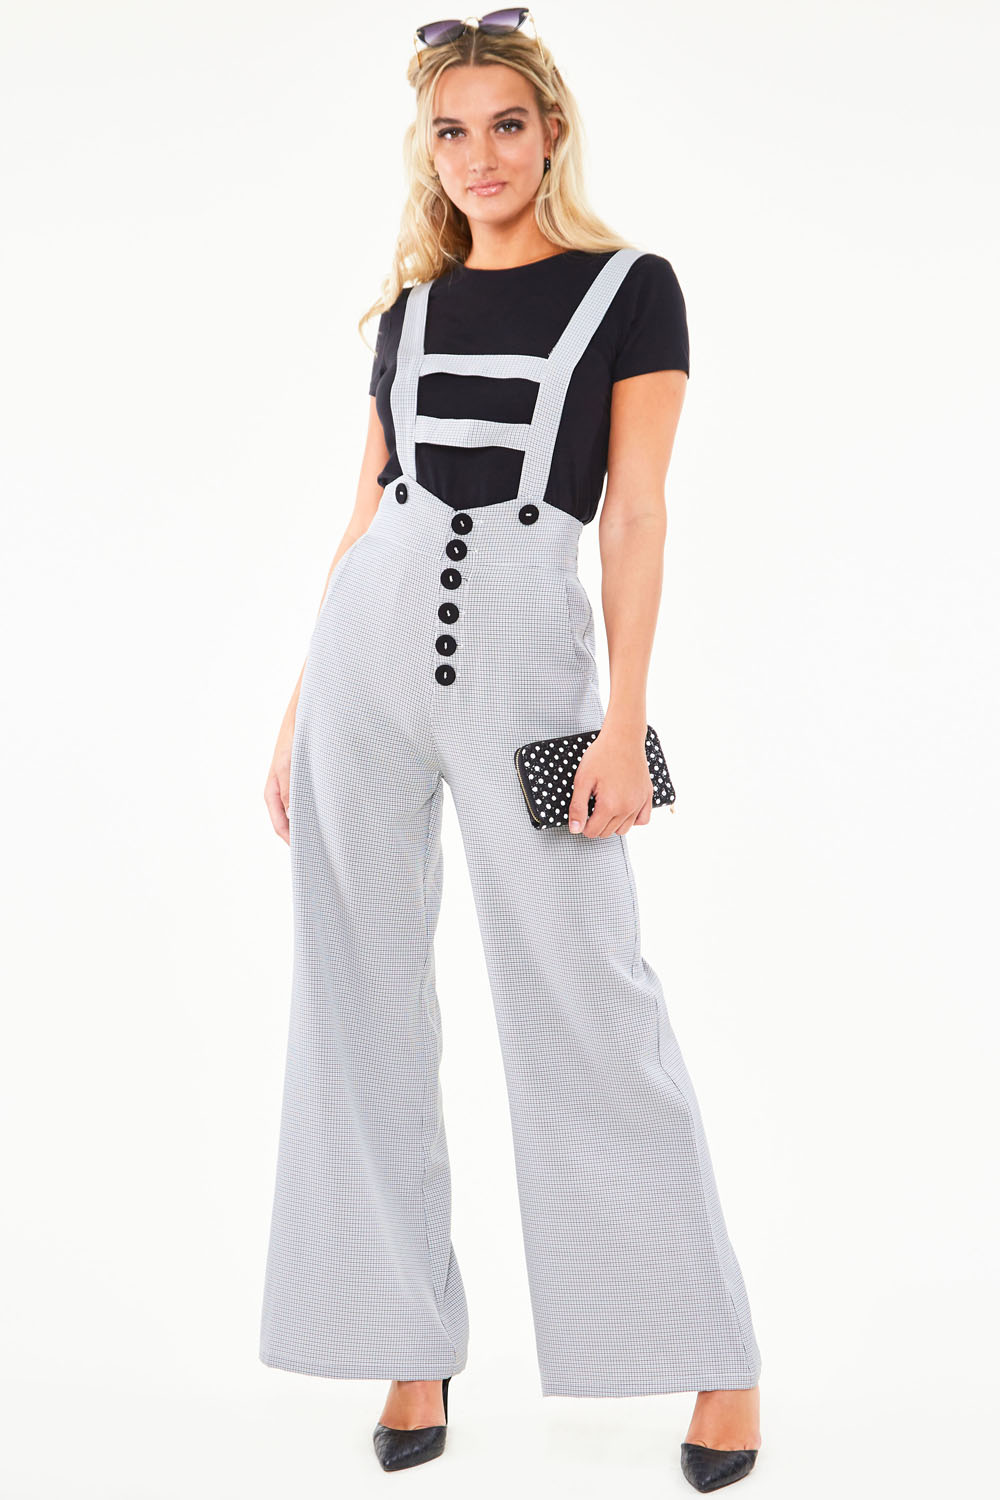 Tri-colour houndstooth overall work trouser | Vintage Inspired Fashion ...